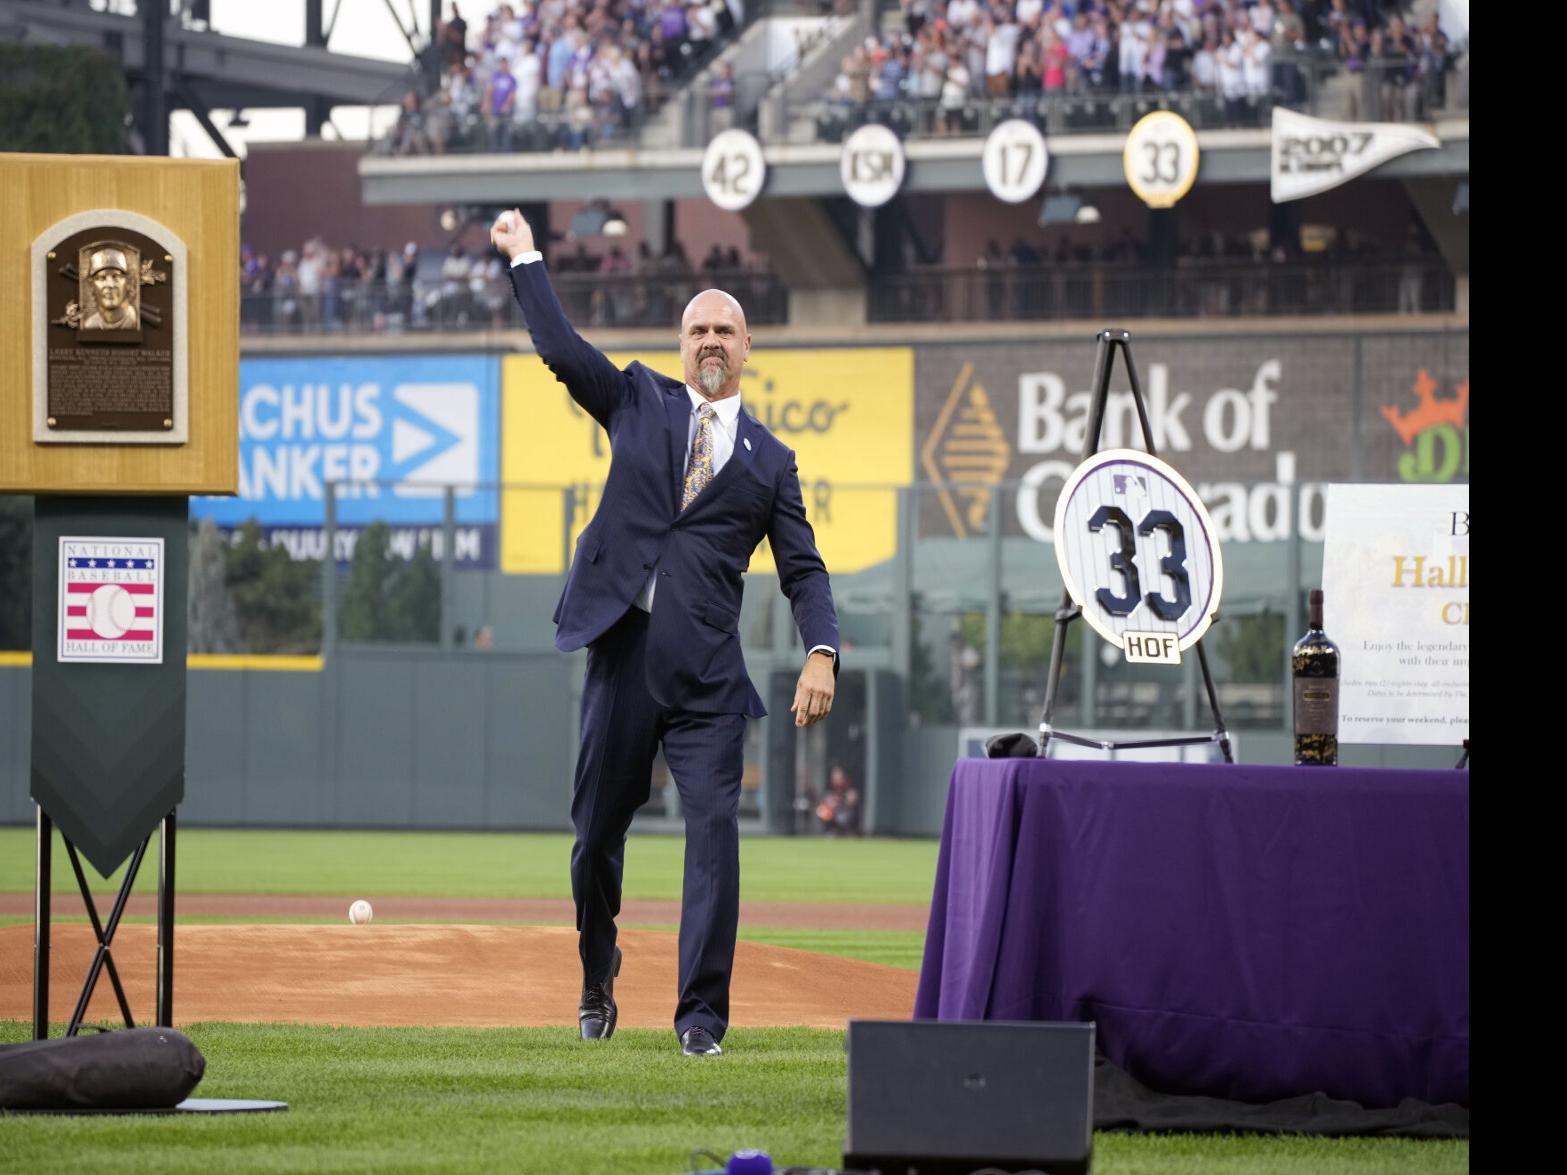 Rockies retire number 33 as they honor Larry Walker, their first